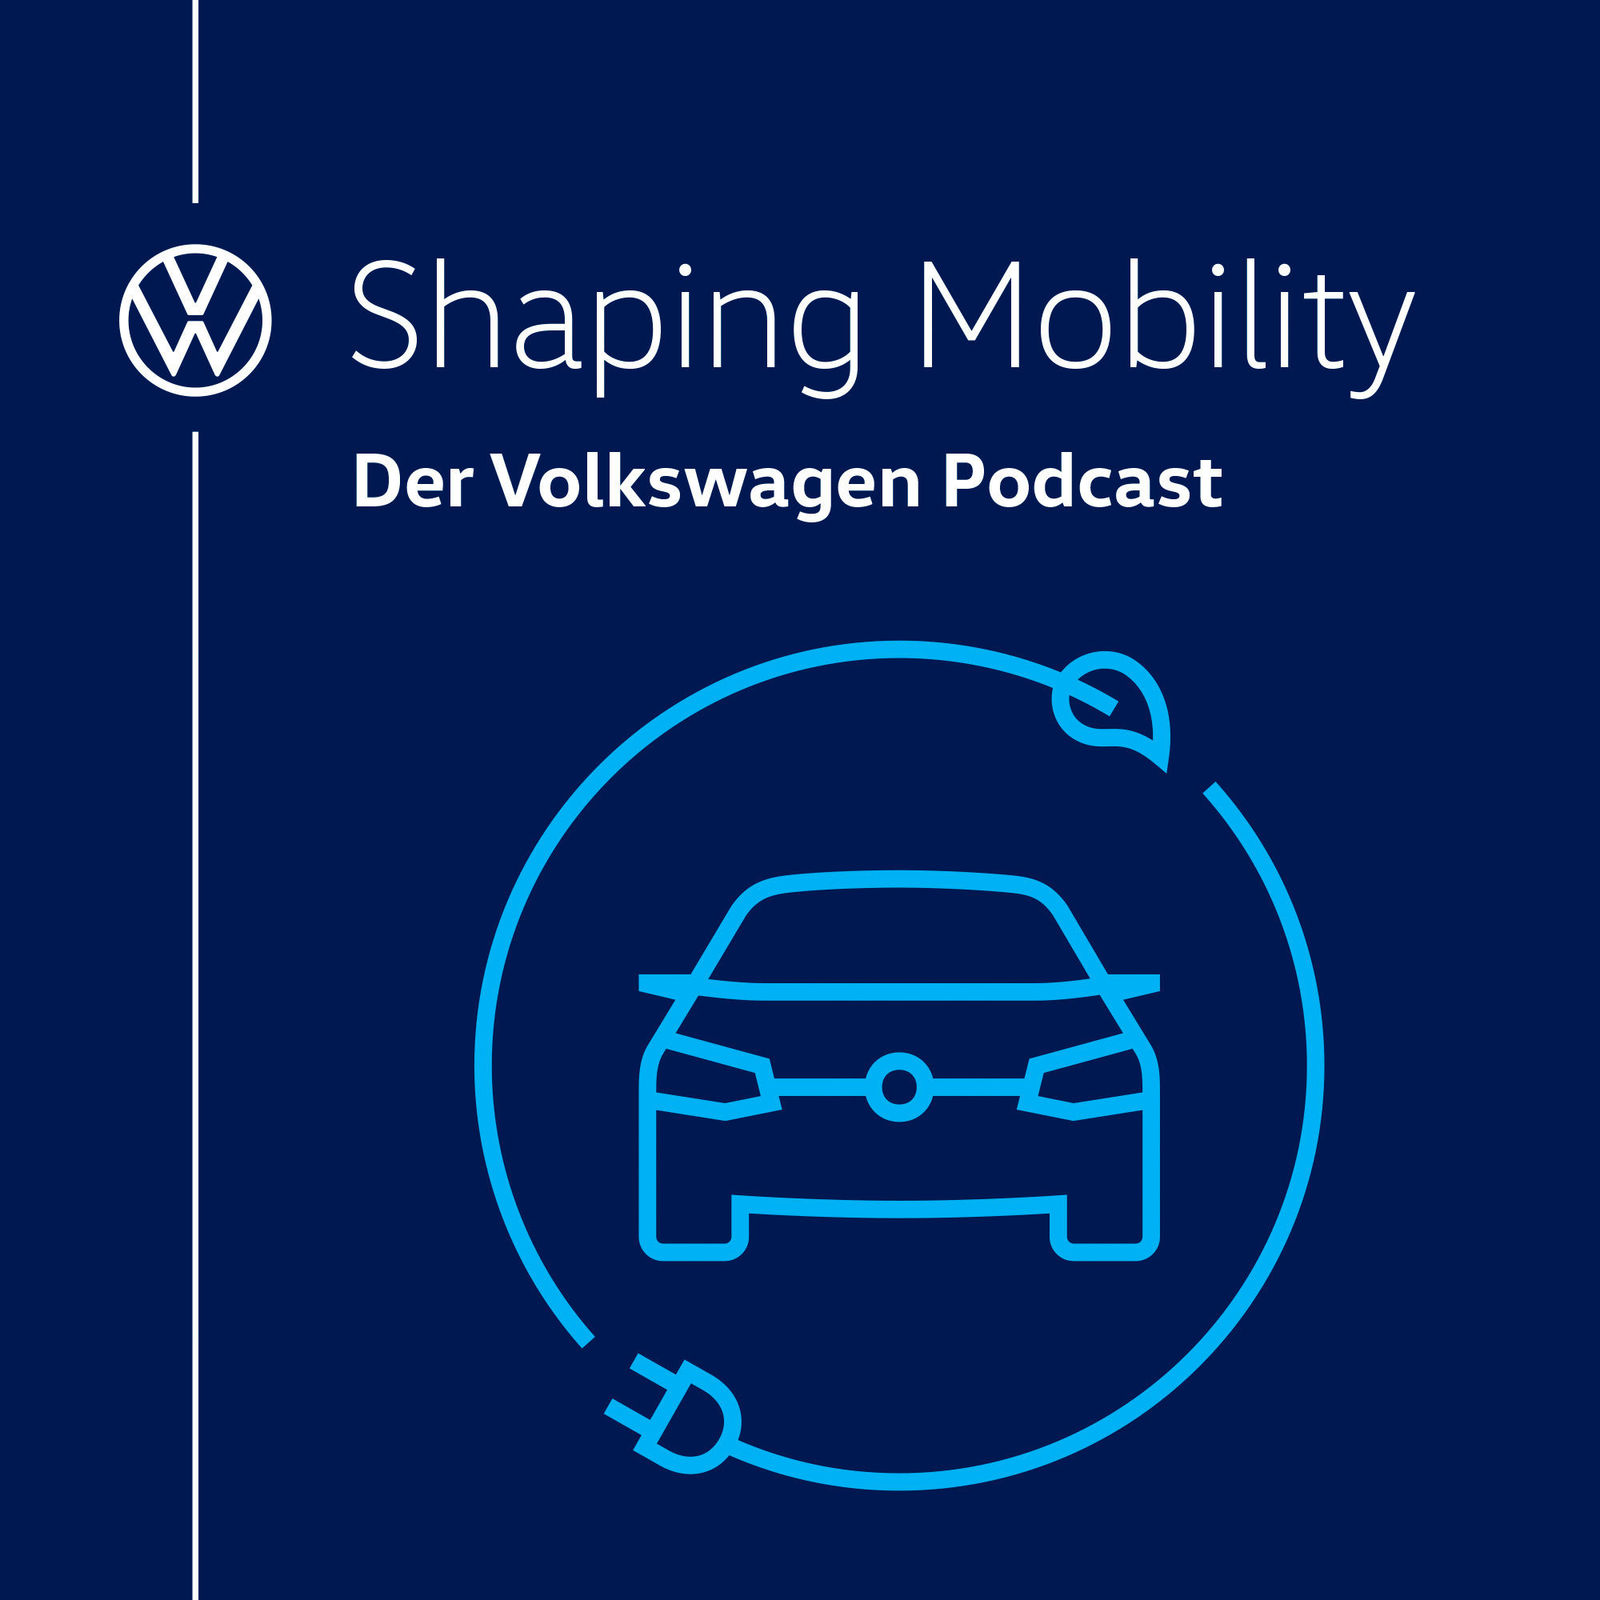 Shaping Mobility - Der Volkswagen Podcast